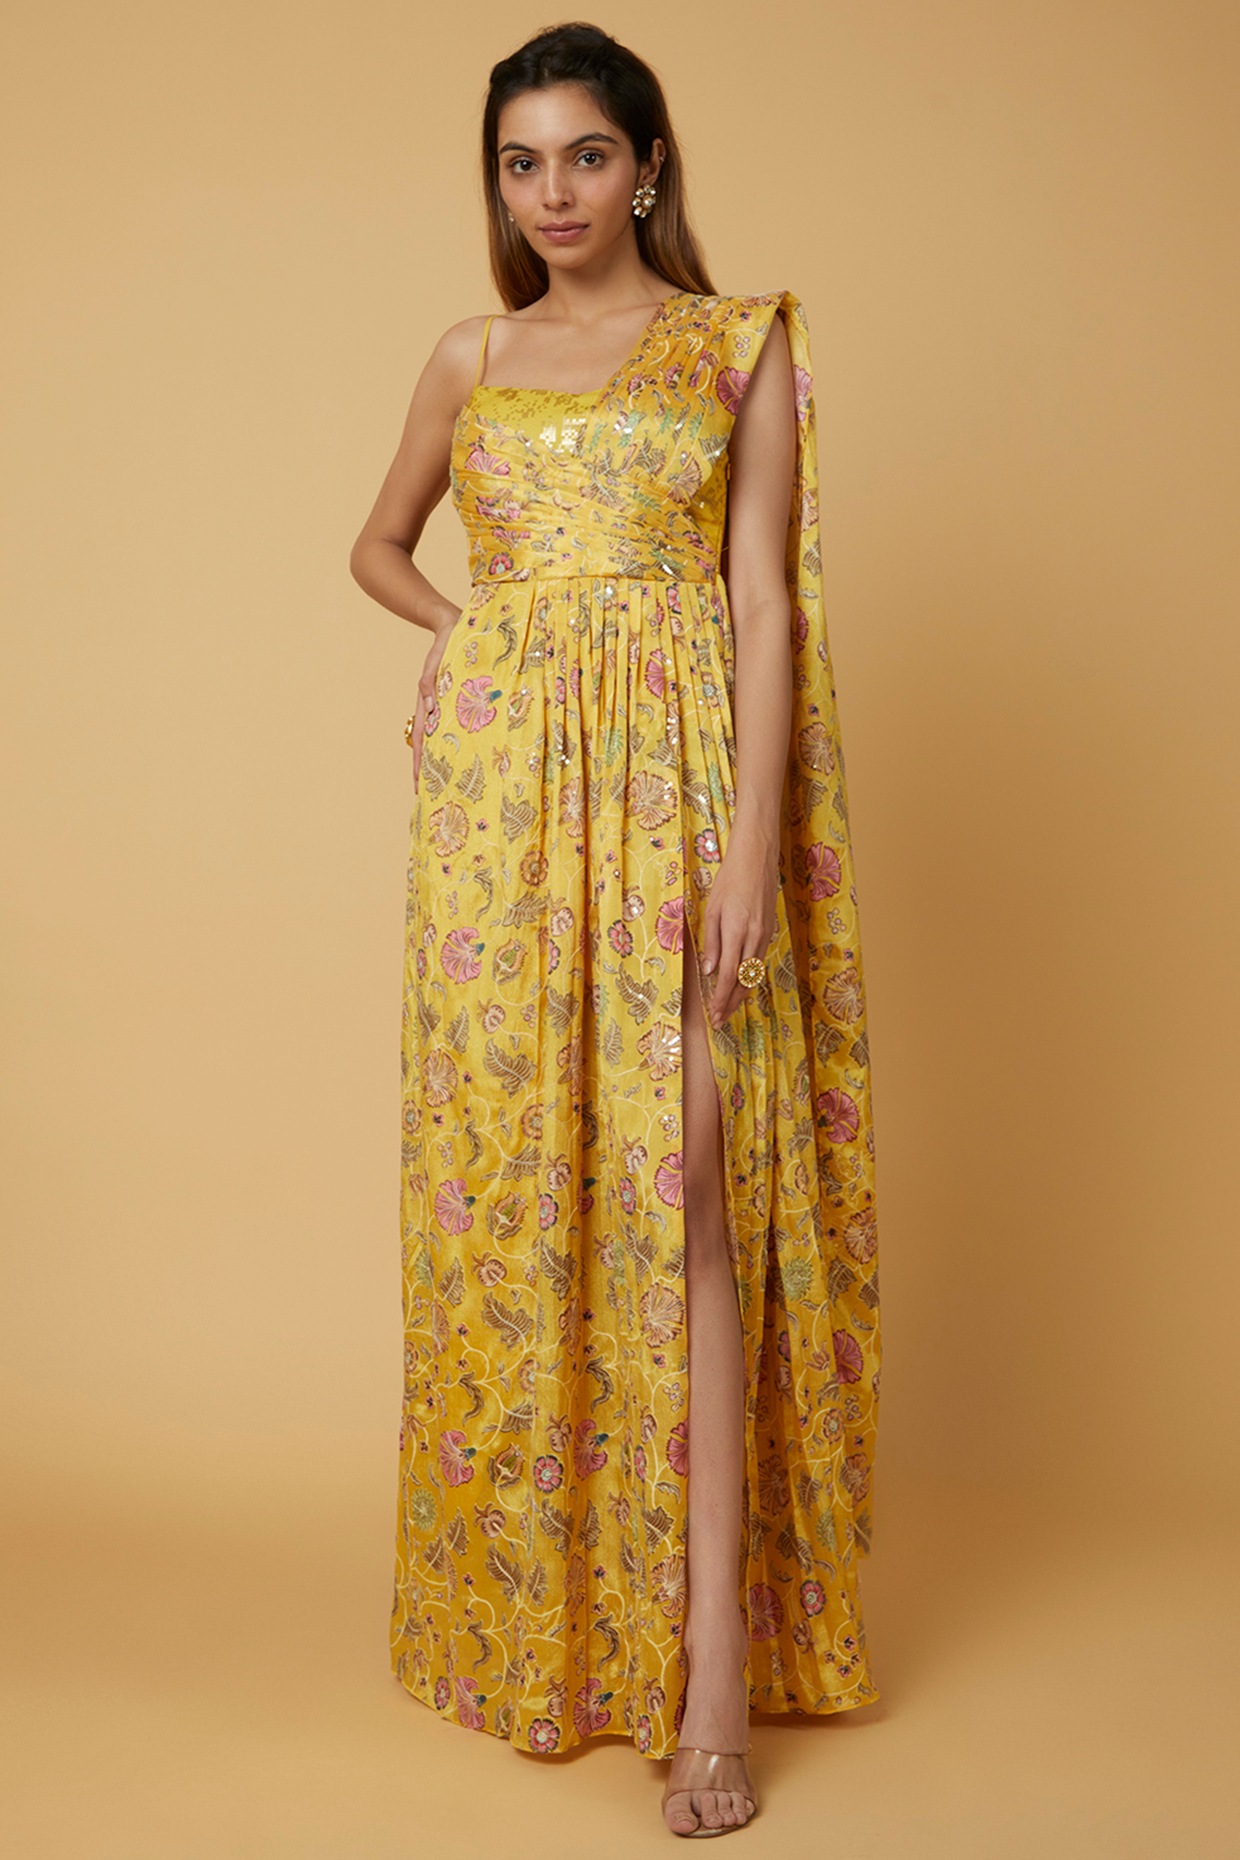 Freshta's new heavy Embroidered yellow colour gown